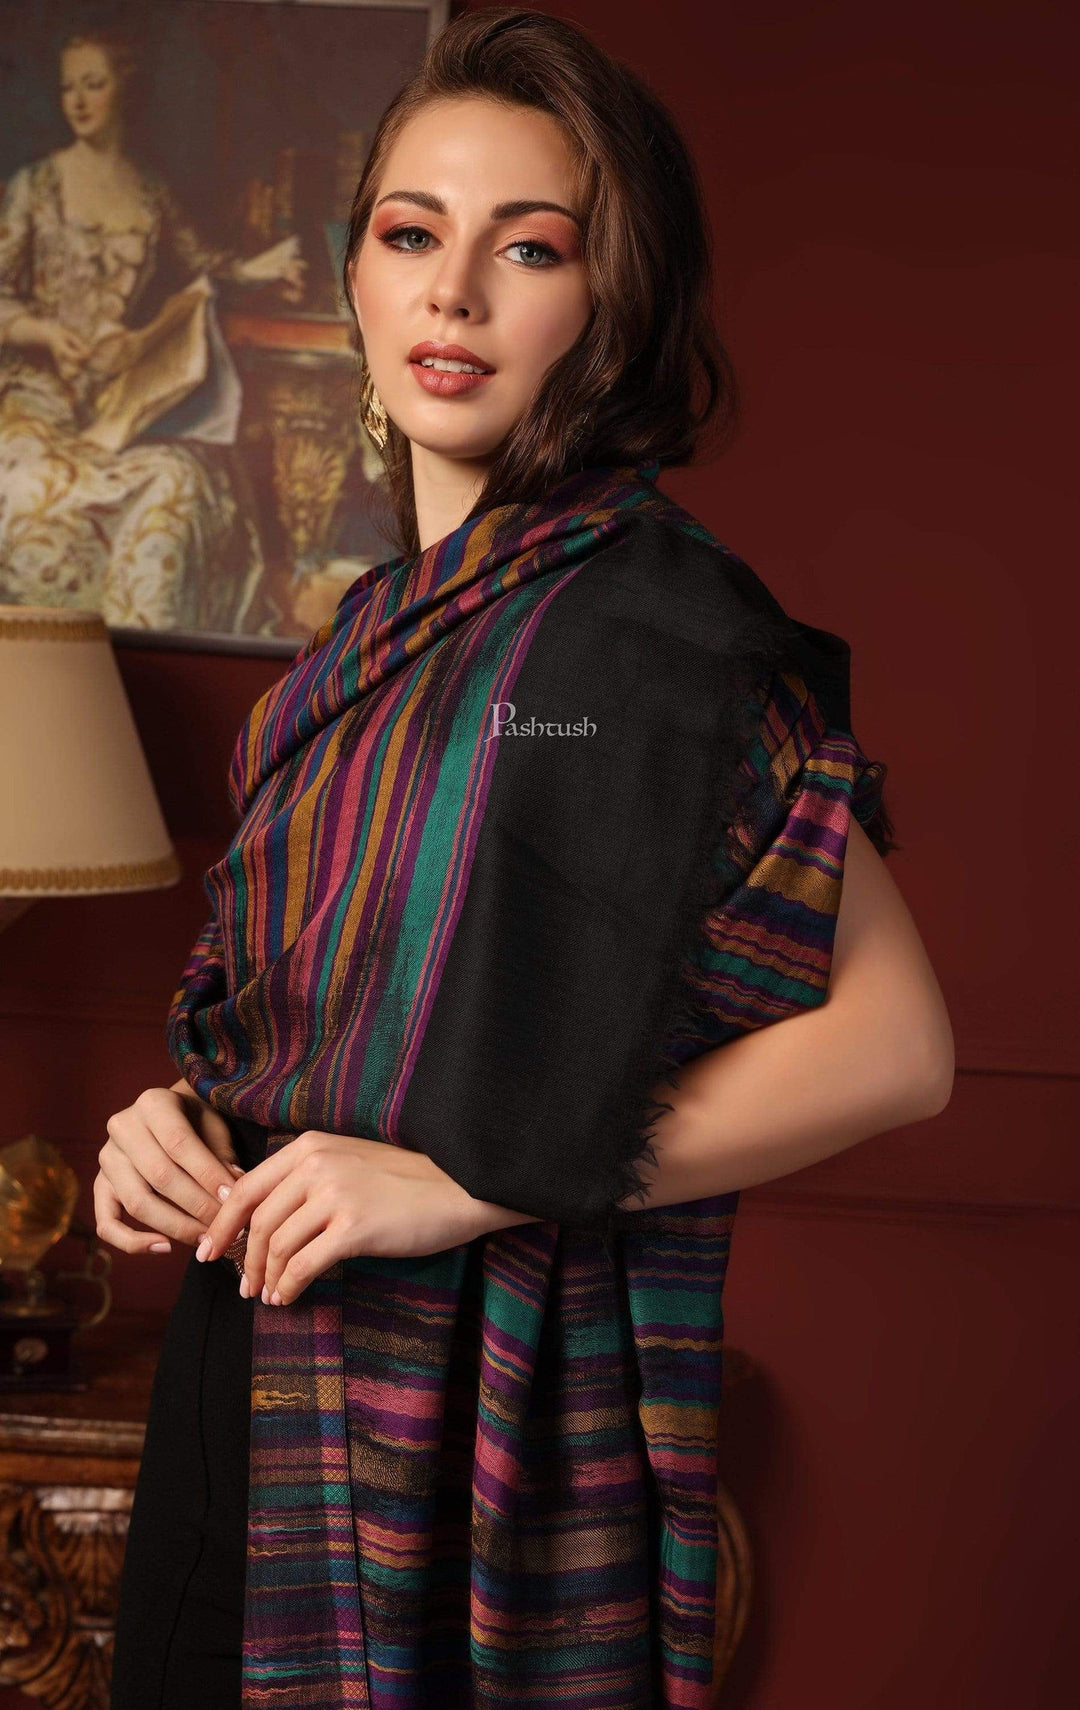 Pashtush India Gift Pack Pashtush His And Her Set Of Pure Wool Shawl and Pure Striped Shawl With Wooden Chester Box, Beige and Multi colour